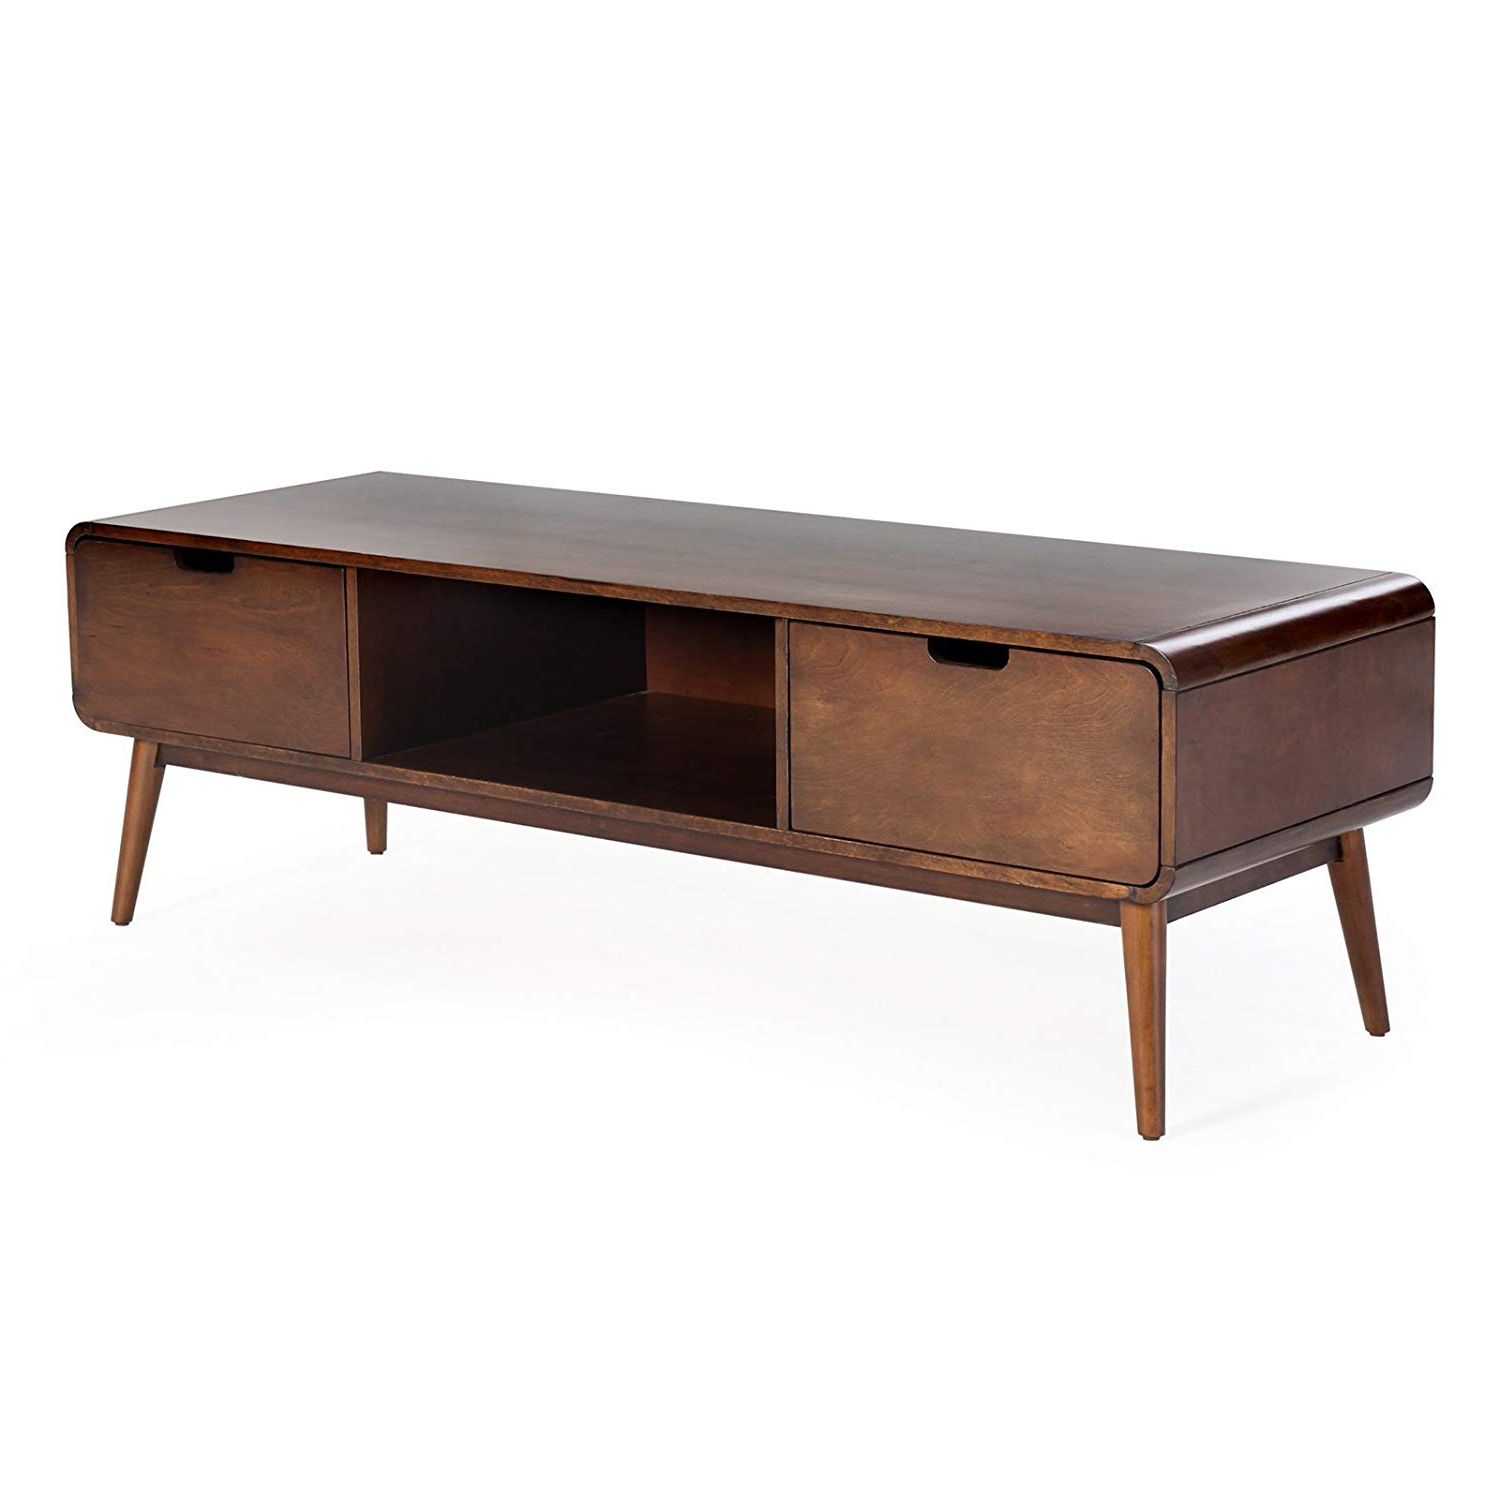 Well Known Draper 62 Inch Tv Stands In Amazon: Belham Living Carter Mid Century Modern Tv Stand (View 11 of 20)